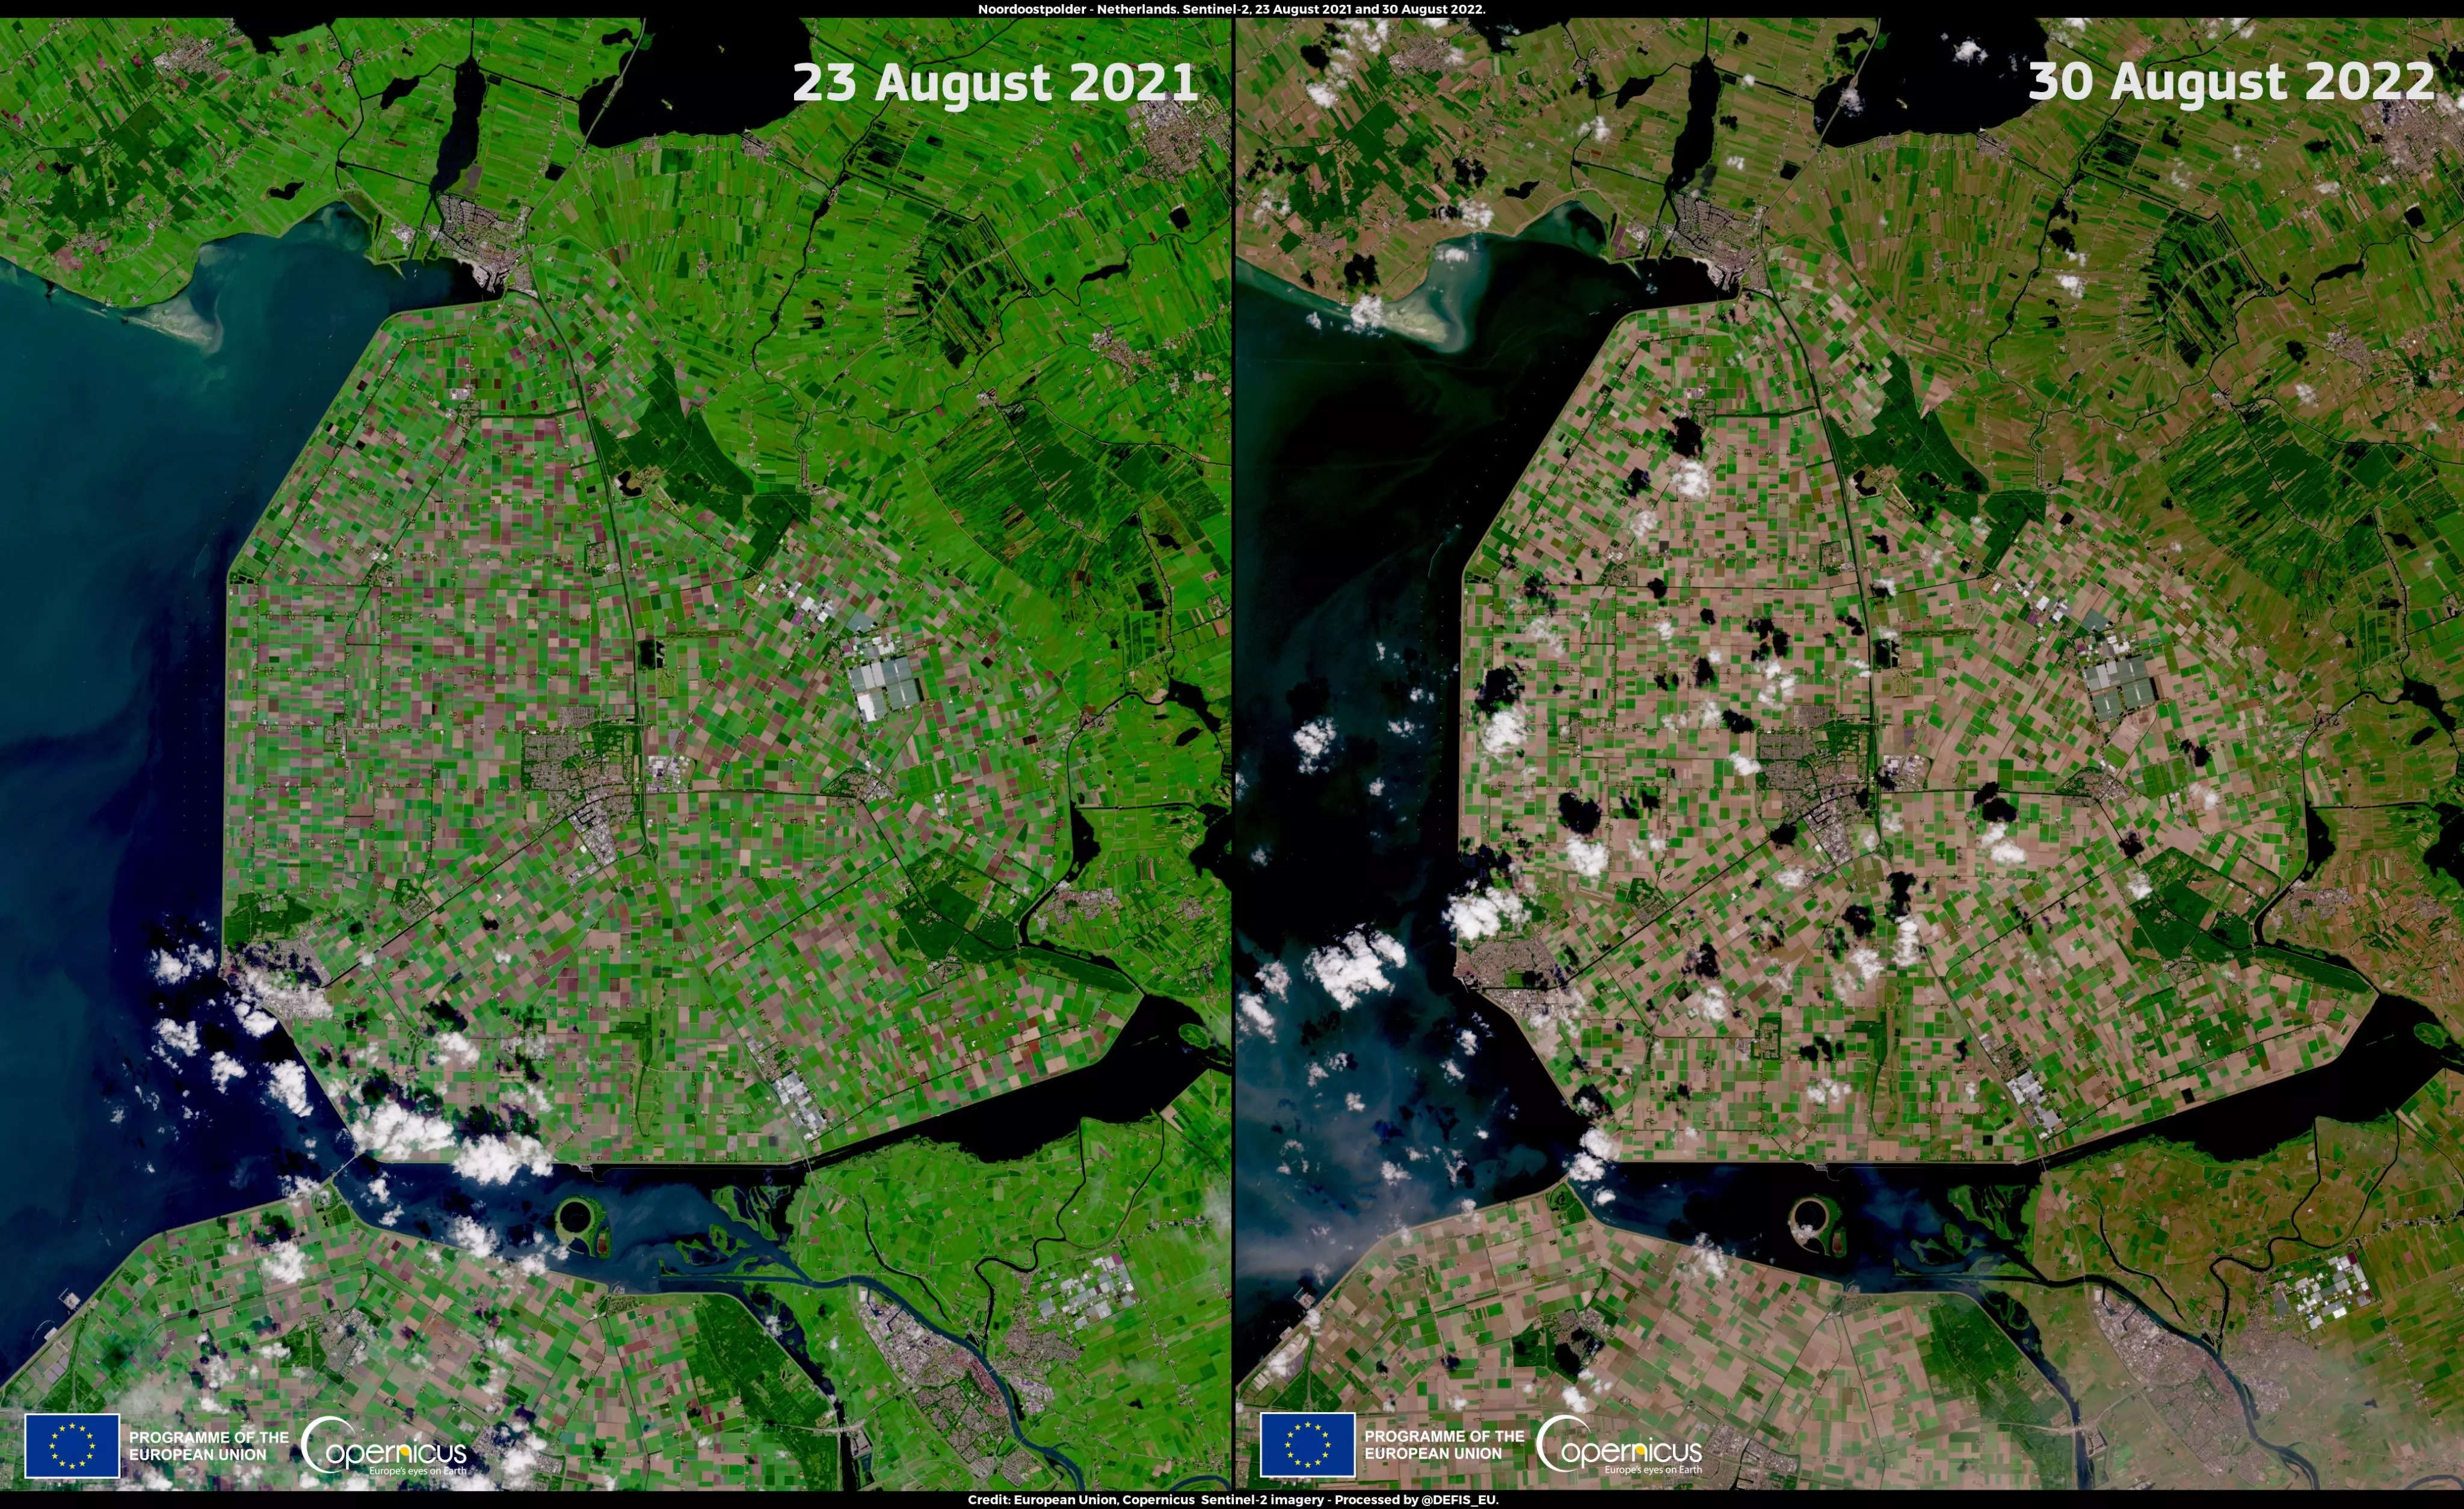 The drought has affected several sector such as agriculture, transport and energy generation. (Pic courtesy: Copernicus Sentinel-2 satellite)